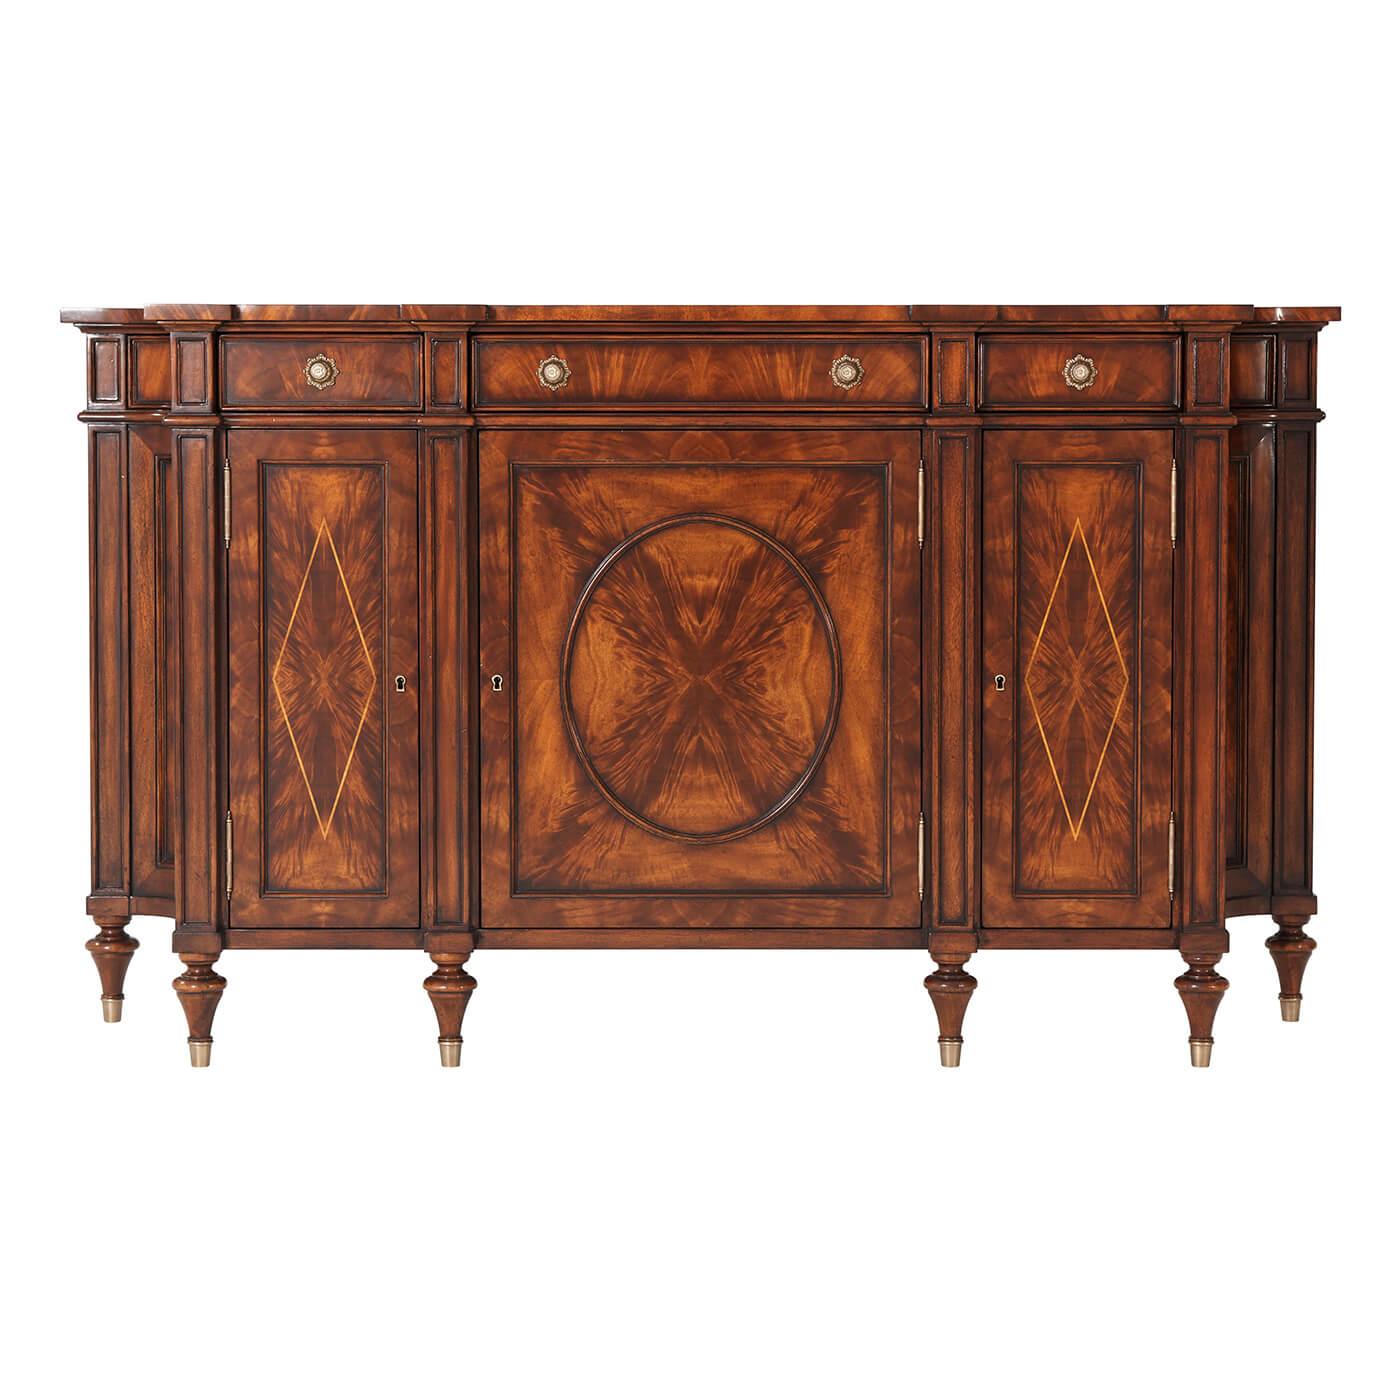 A fine Regency style mahogany and burl mahogany banded side cabinet, with three frieze drawers above corresponding oval panel and lozenge inlaid doors enclosing adjustable shelves, with concave sides, on turned legs with brass cappings.